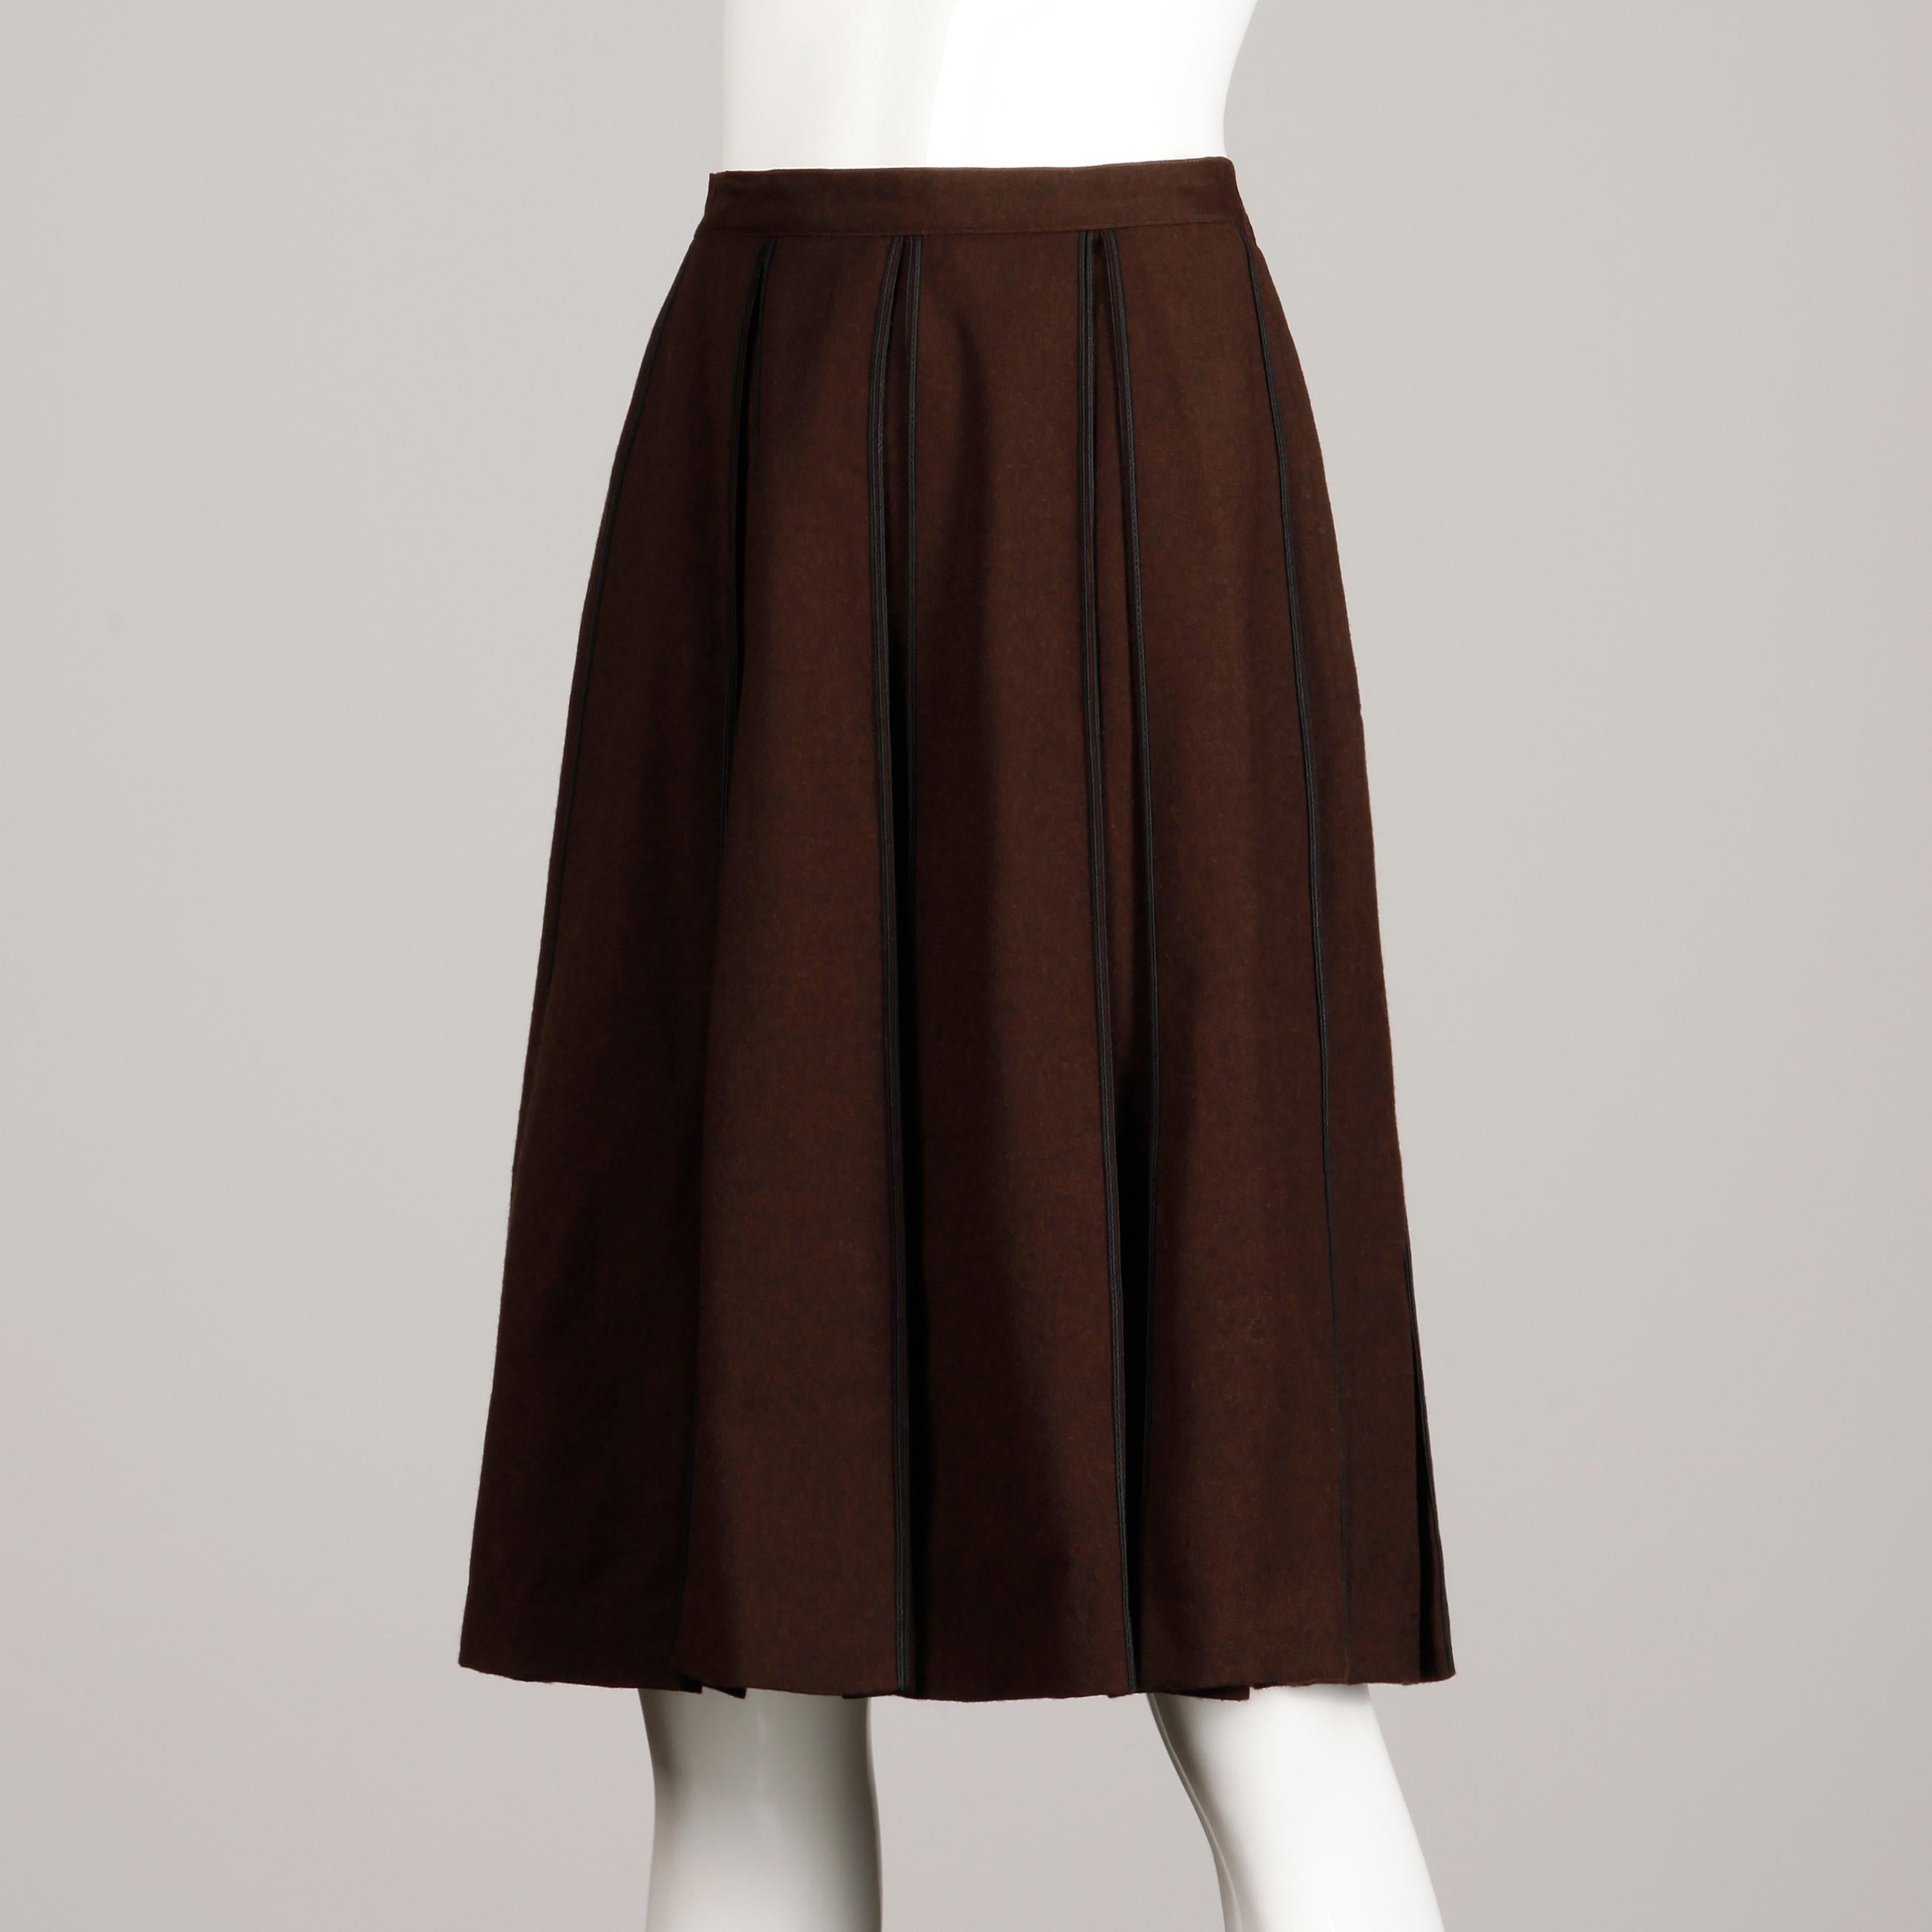 Women's 1960s B.H. Wragge Vintage Brown Wool Skirt with Box Pleats + Black Cord Trim For Sale